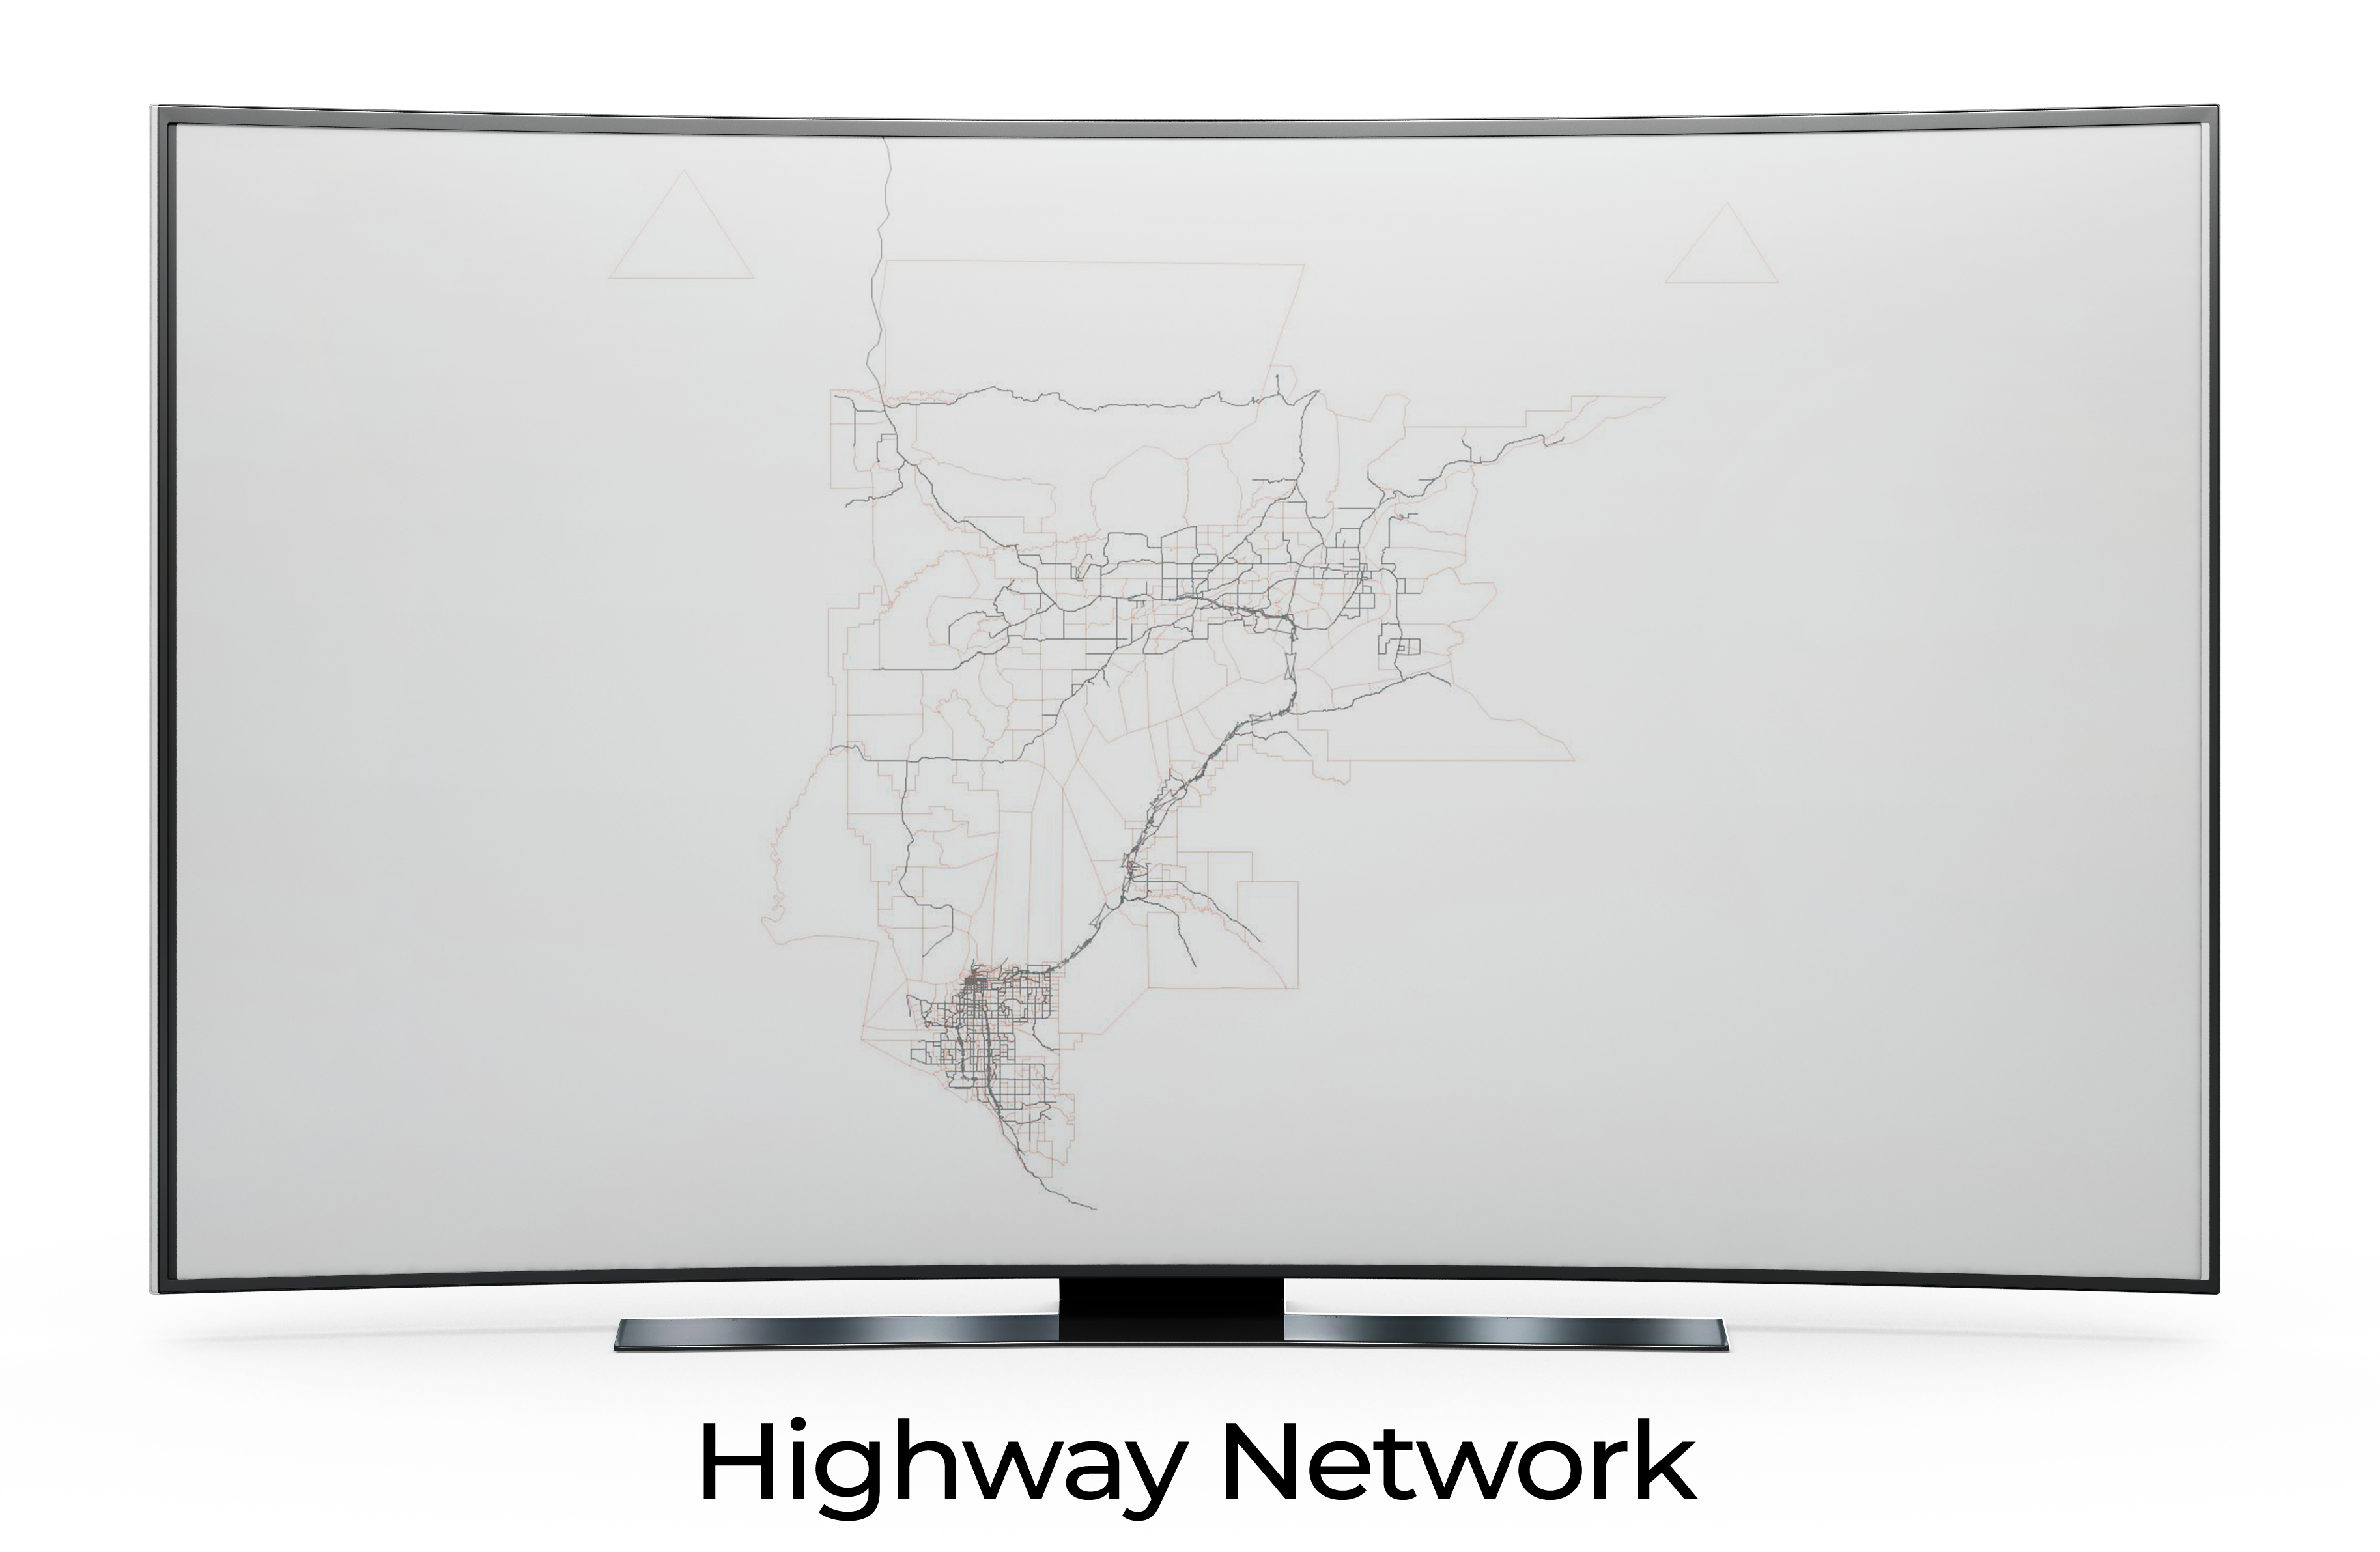 Outline of a highway network displayed on a curved screen.